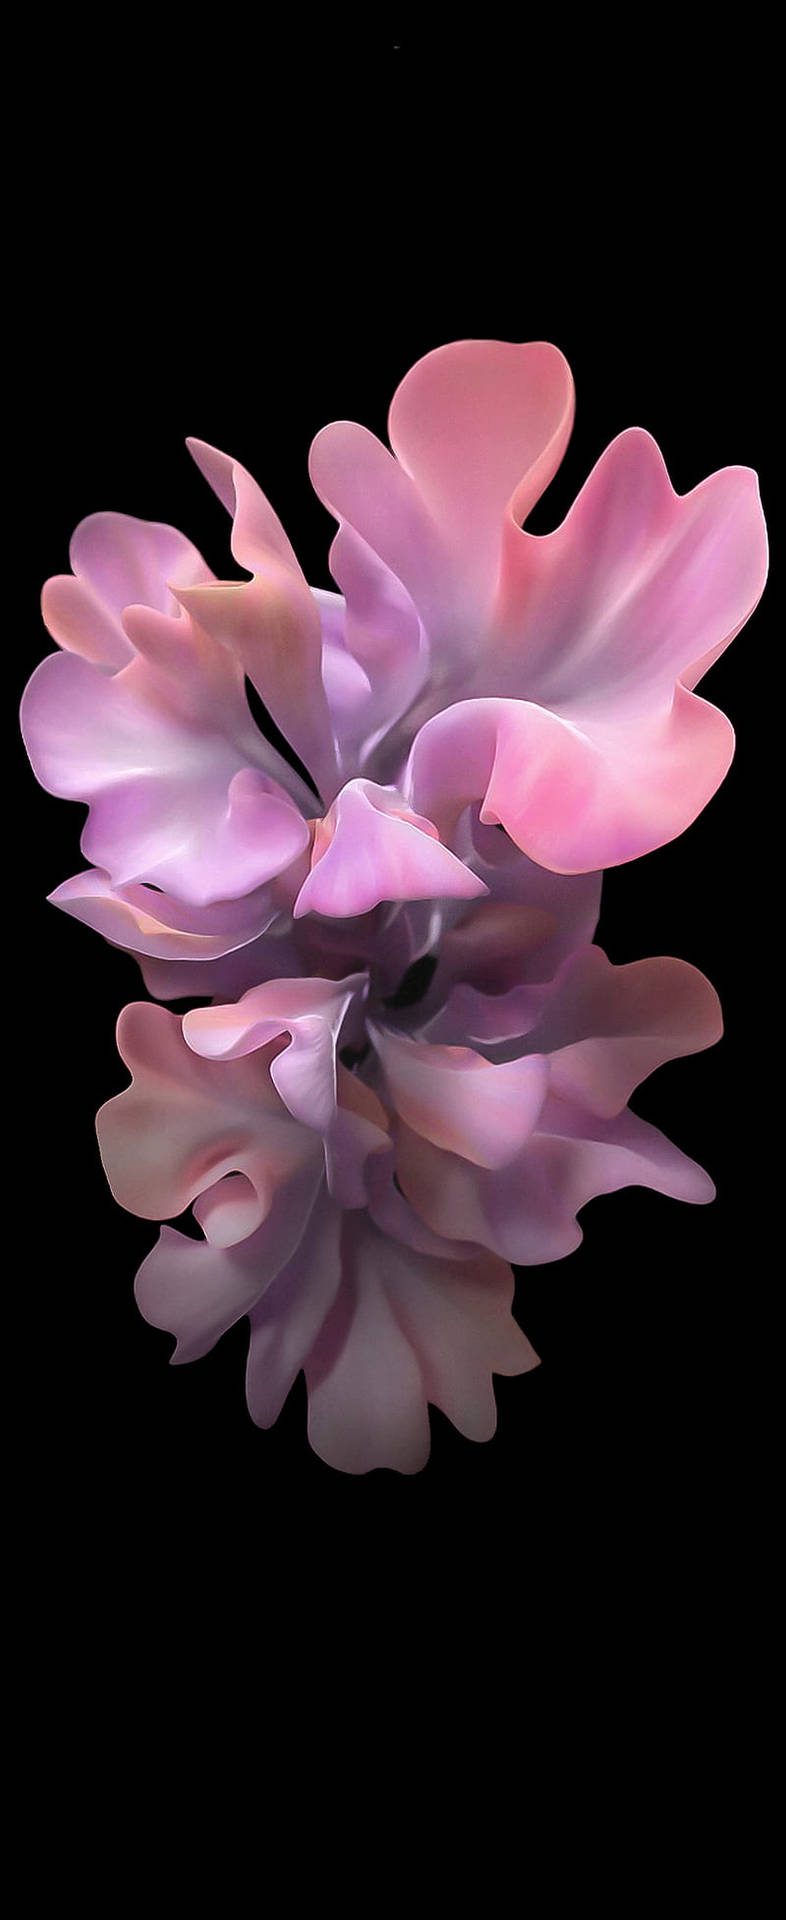 Samsung Galaxy S20 Sweet Pea Flower In Pink Background